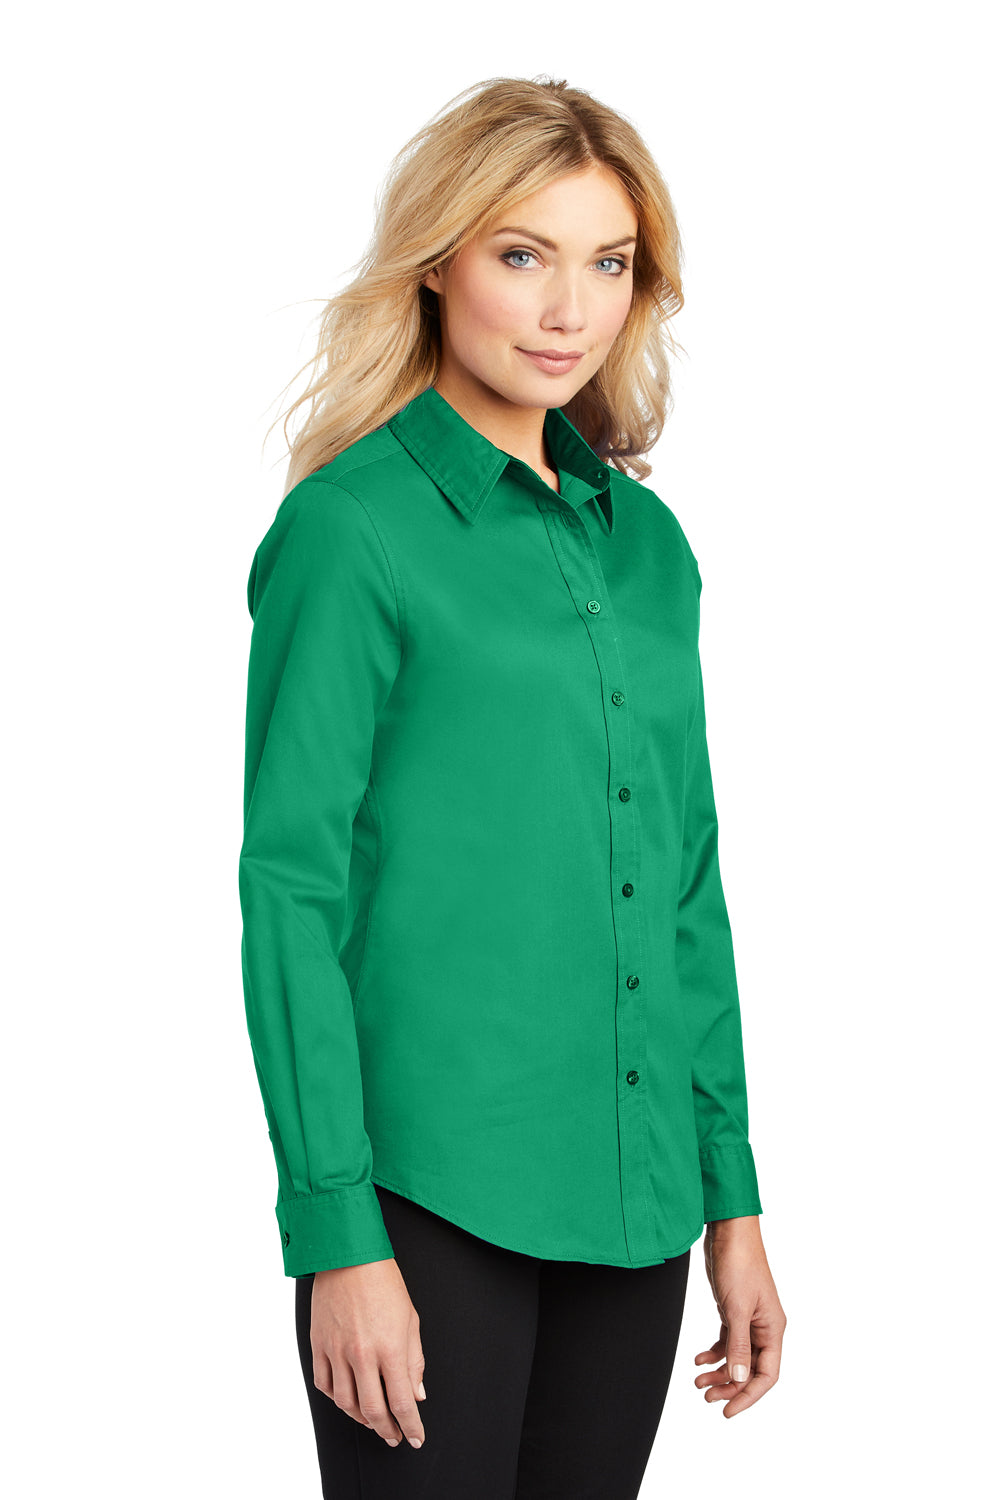 Port Authority L608 Womens Easy Care Wrinkle Resistant Long Sleeve Button Down Shirt Court Green 3Q